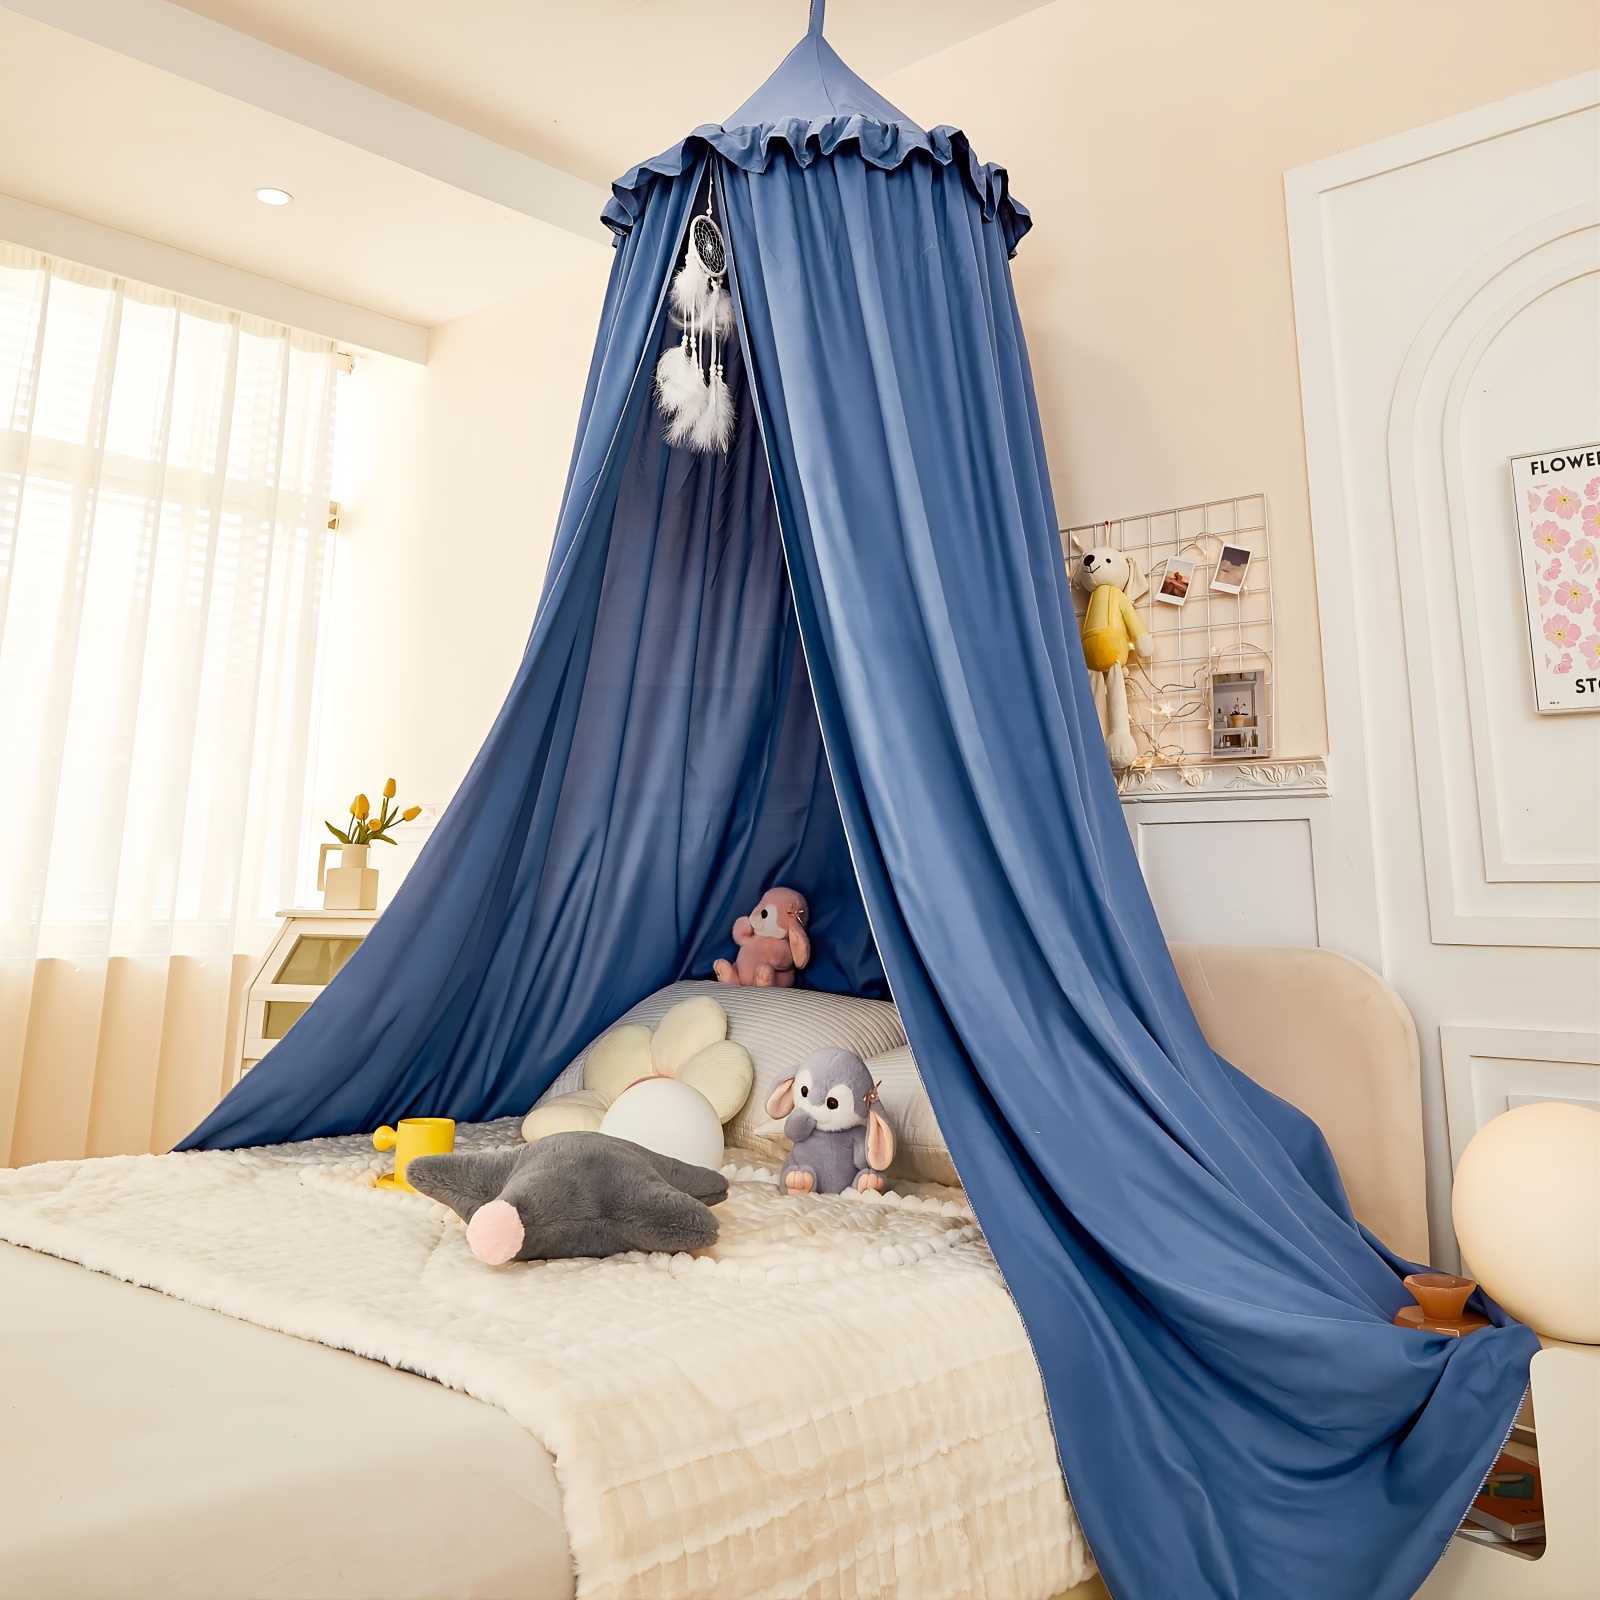 1pc Princess Decor Canopy For Kids Bed, Soft And Durable Mosquito Net Bed  Canopy For Girls Room Tent Canopy (Blue)